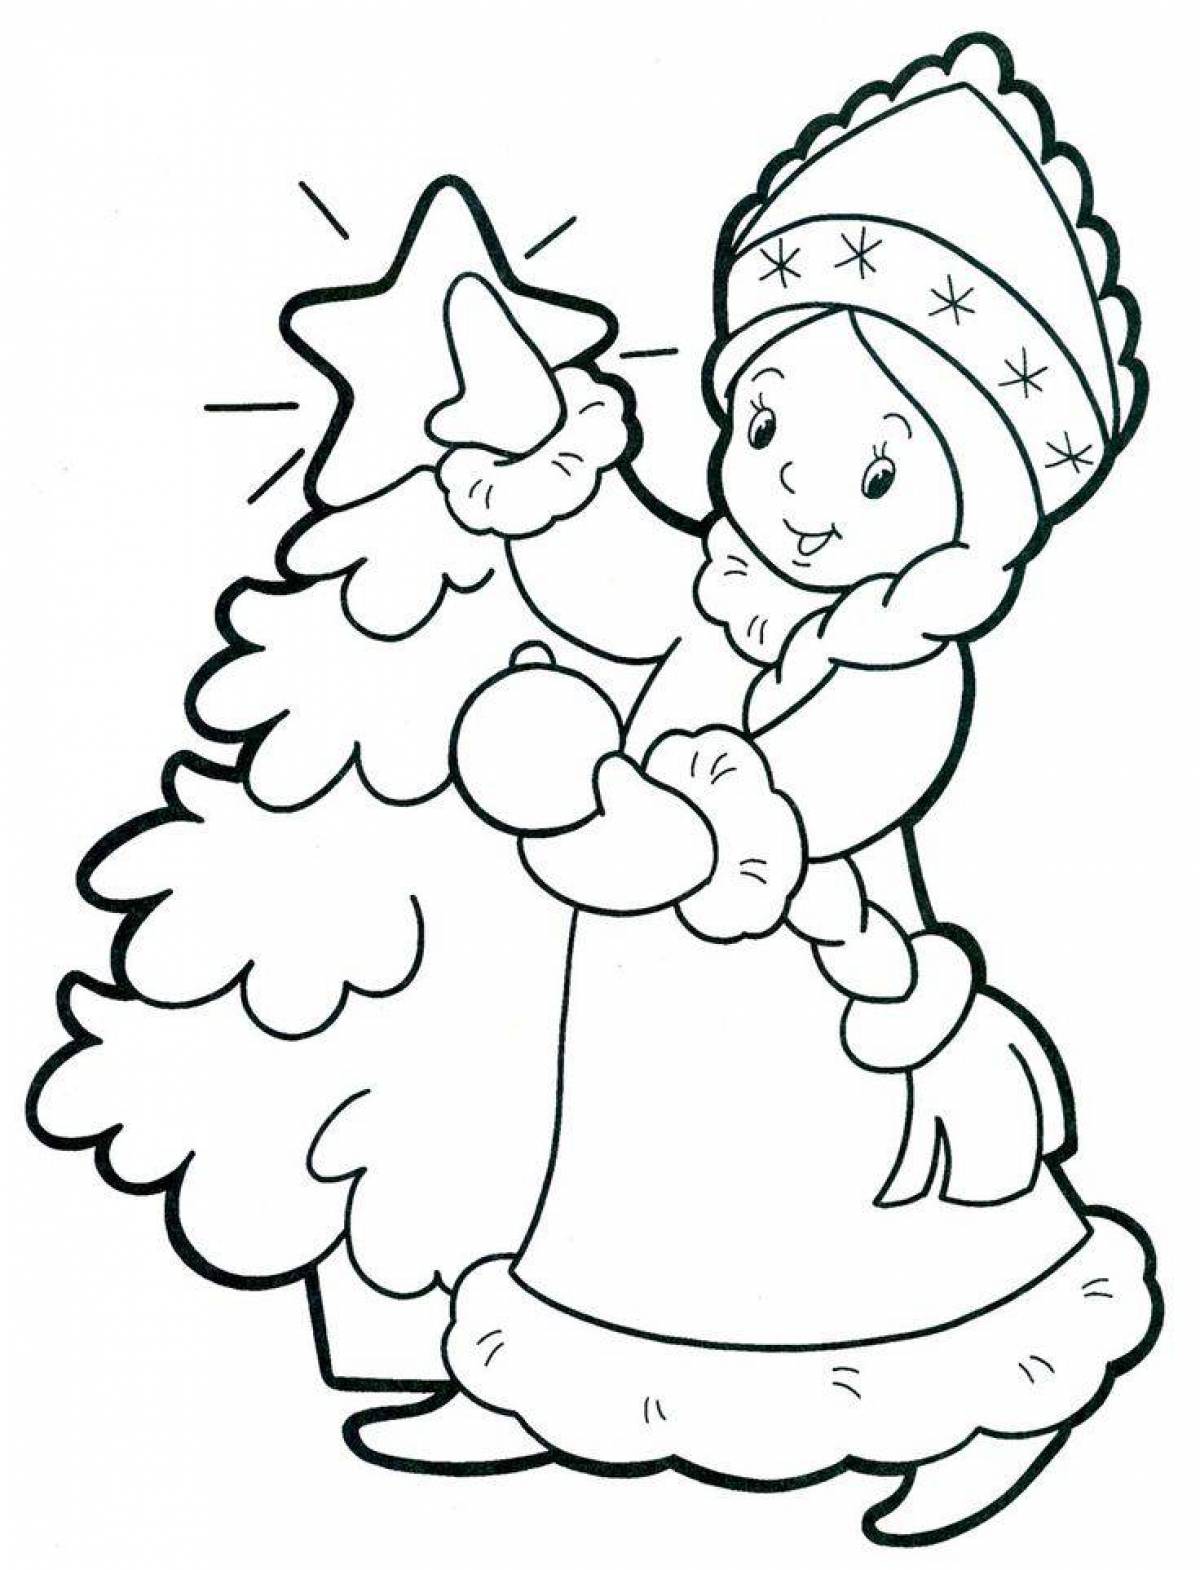 Snow Maiden glitter coloring book for kids